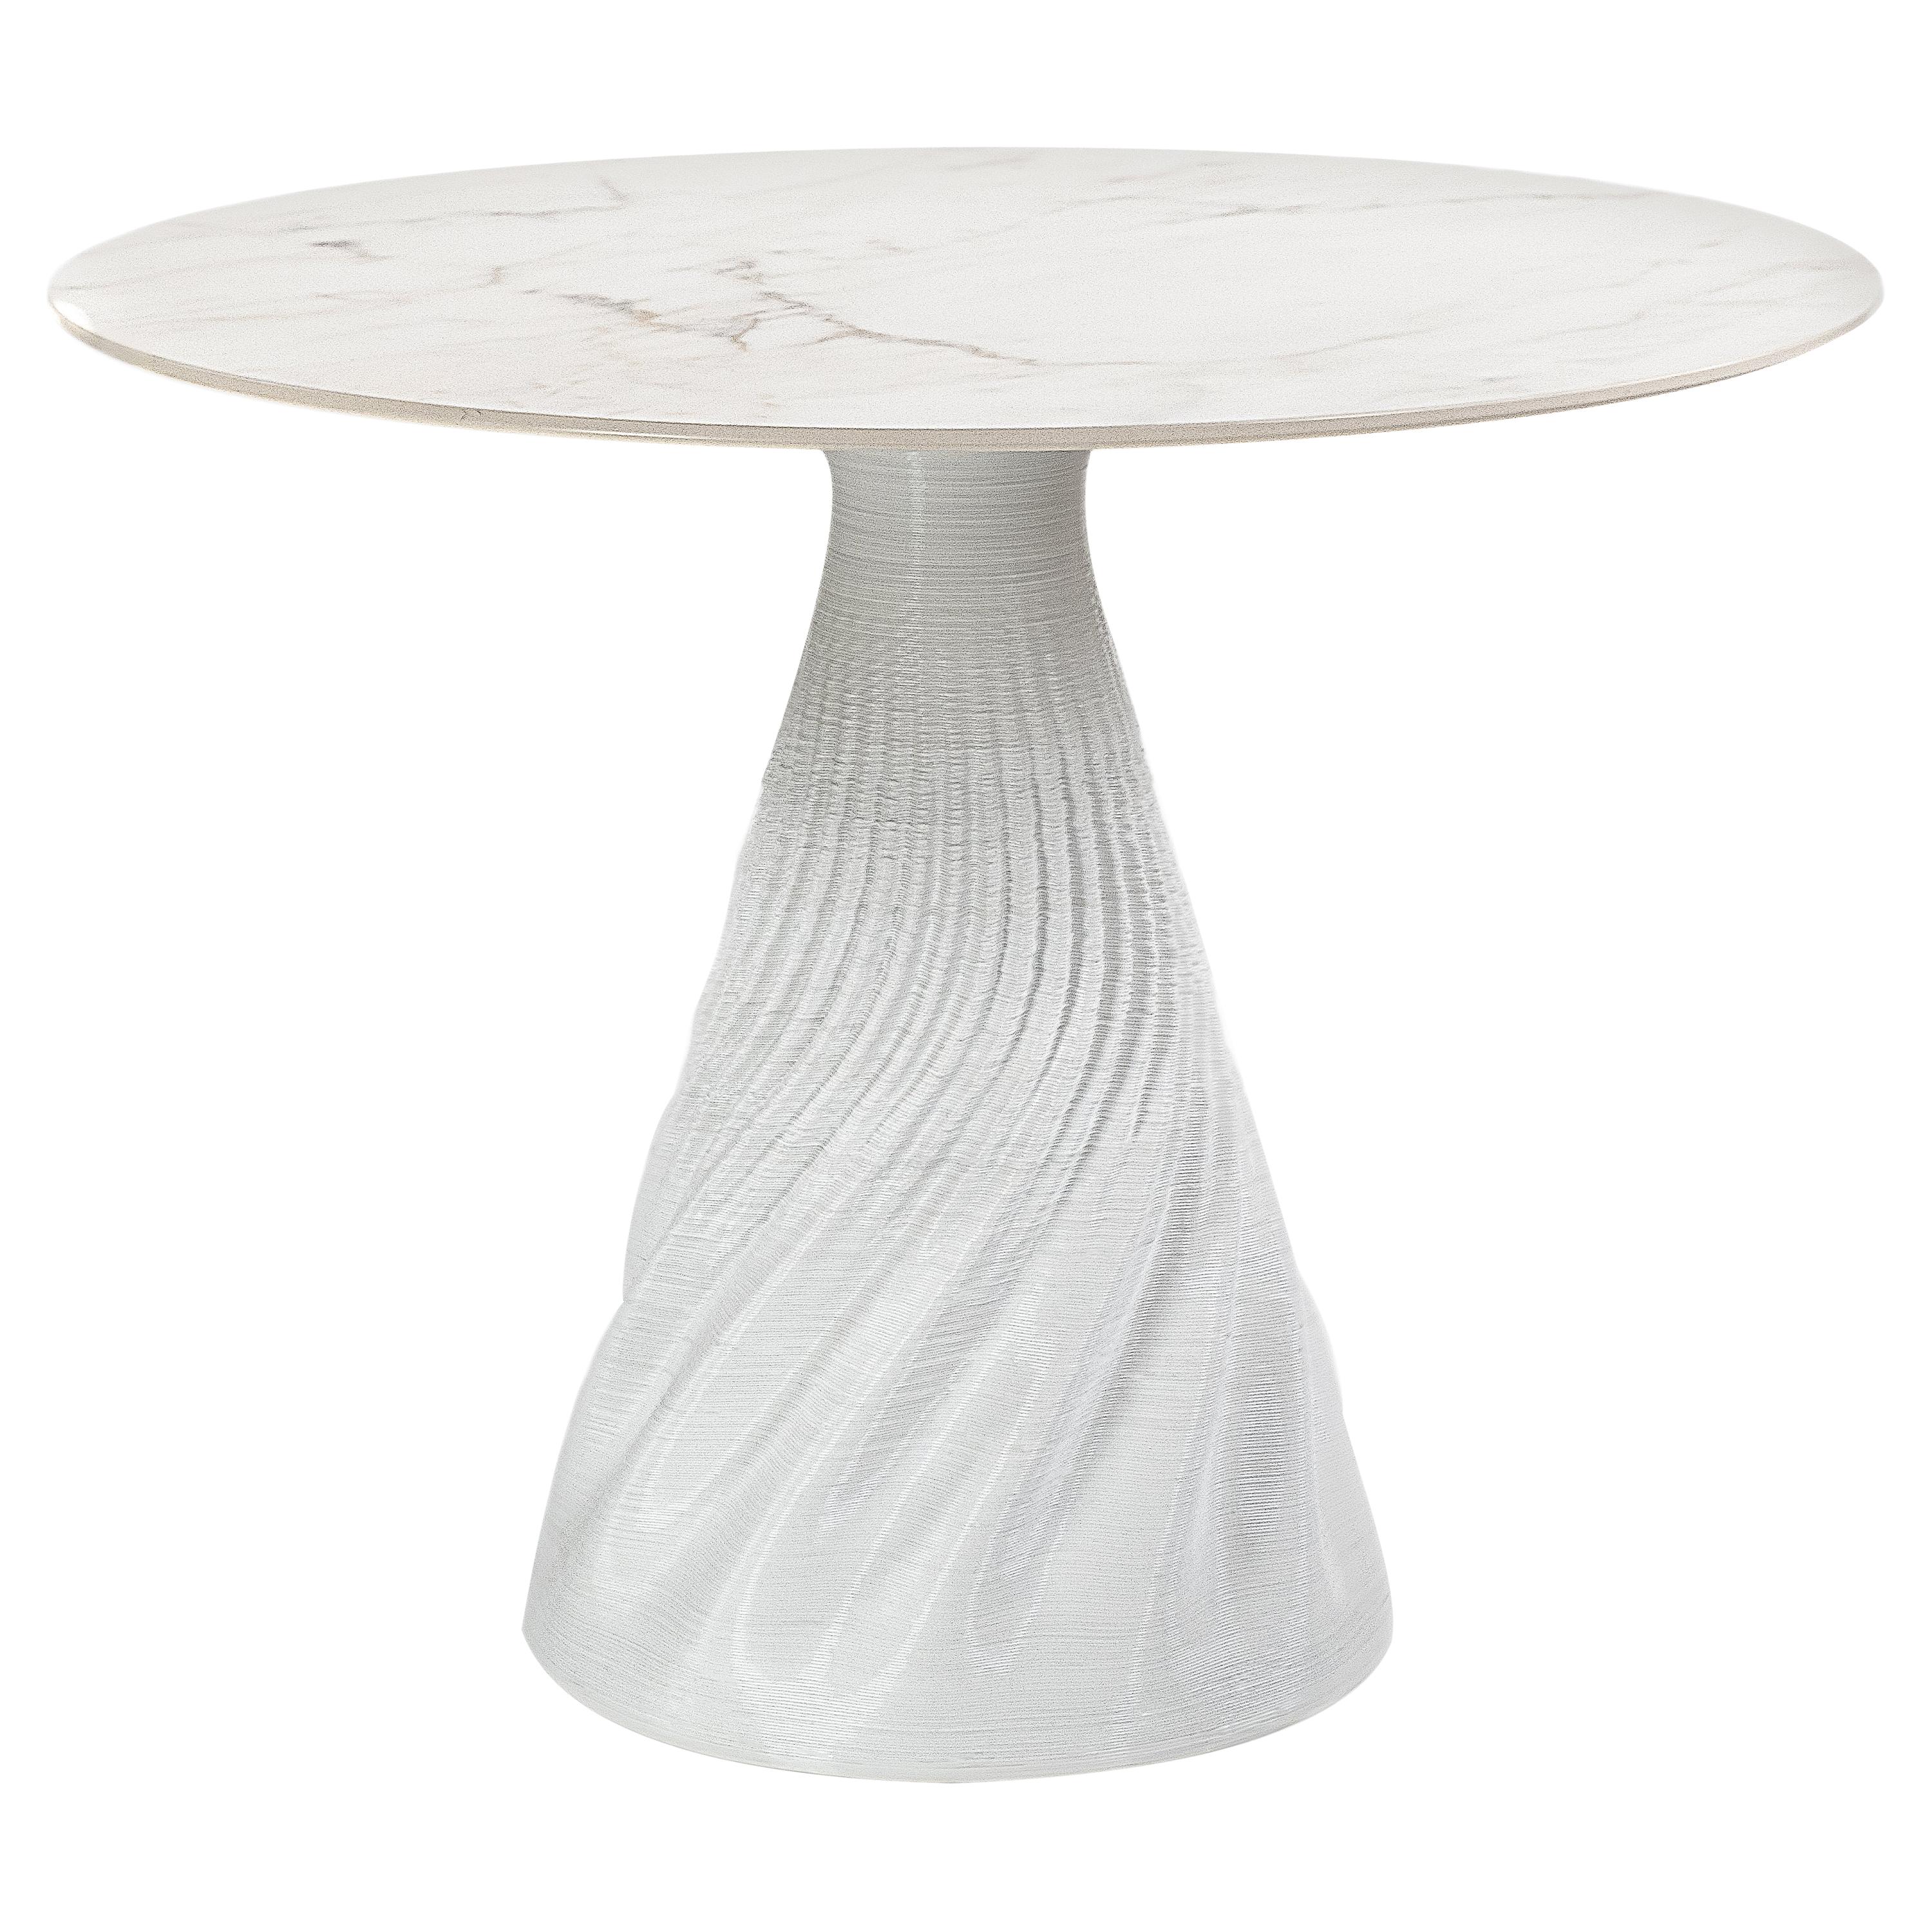 Contemporary white dining table, additive manufacturing in biopolymers, Italy For Sale